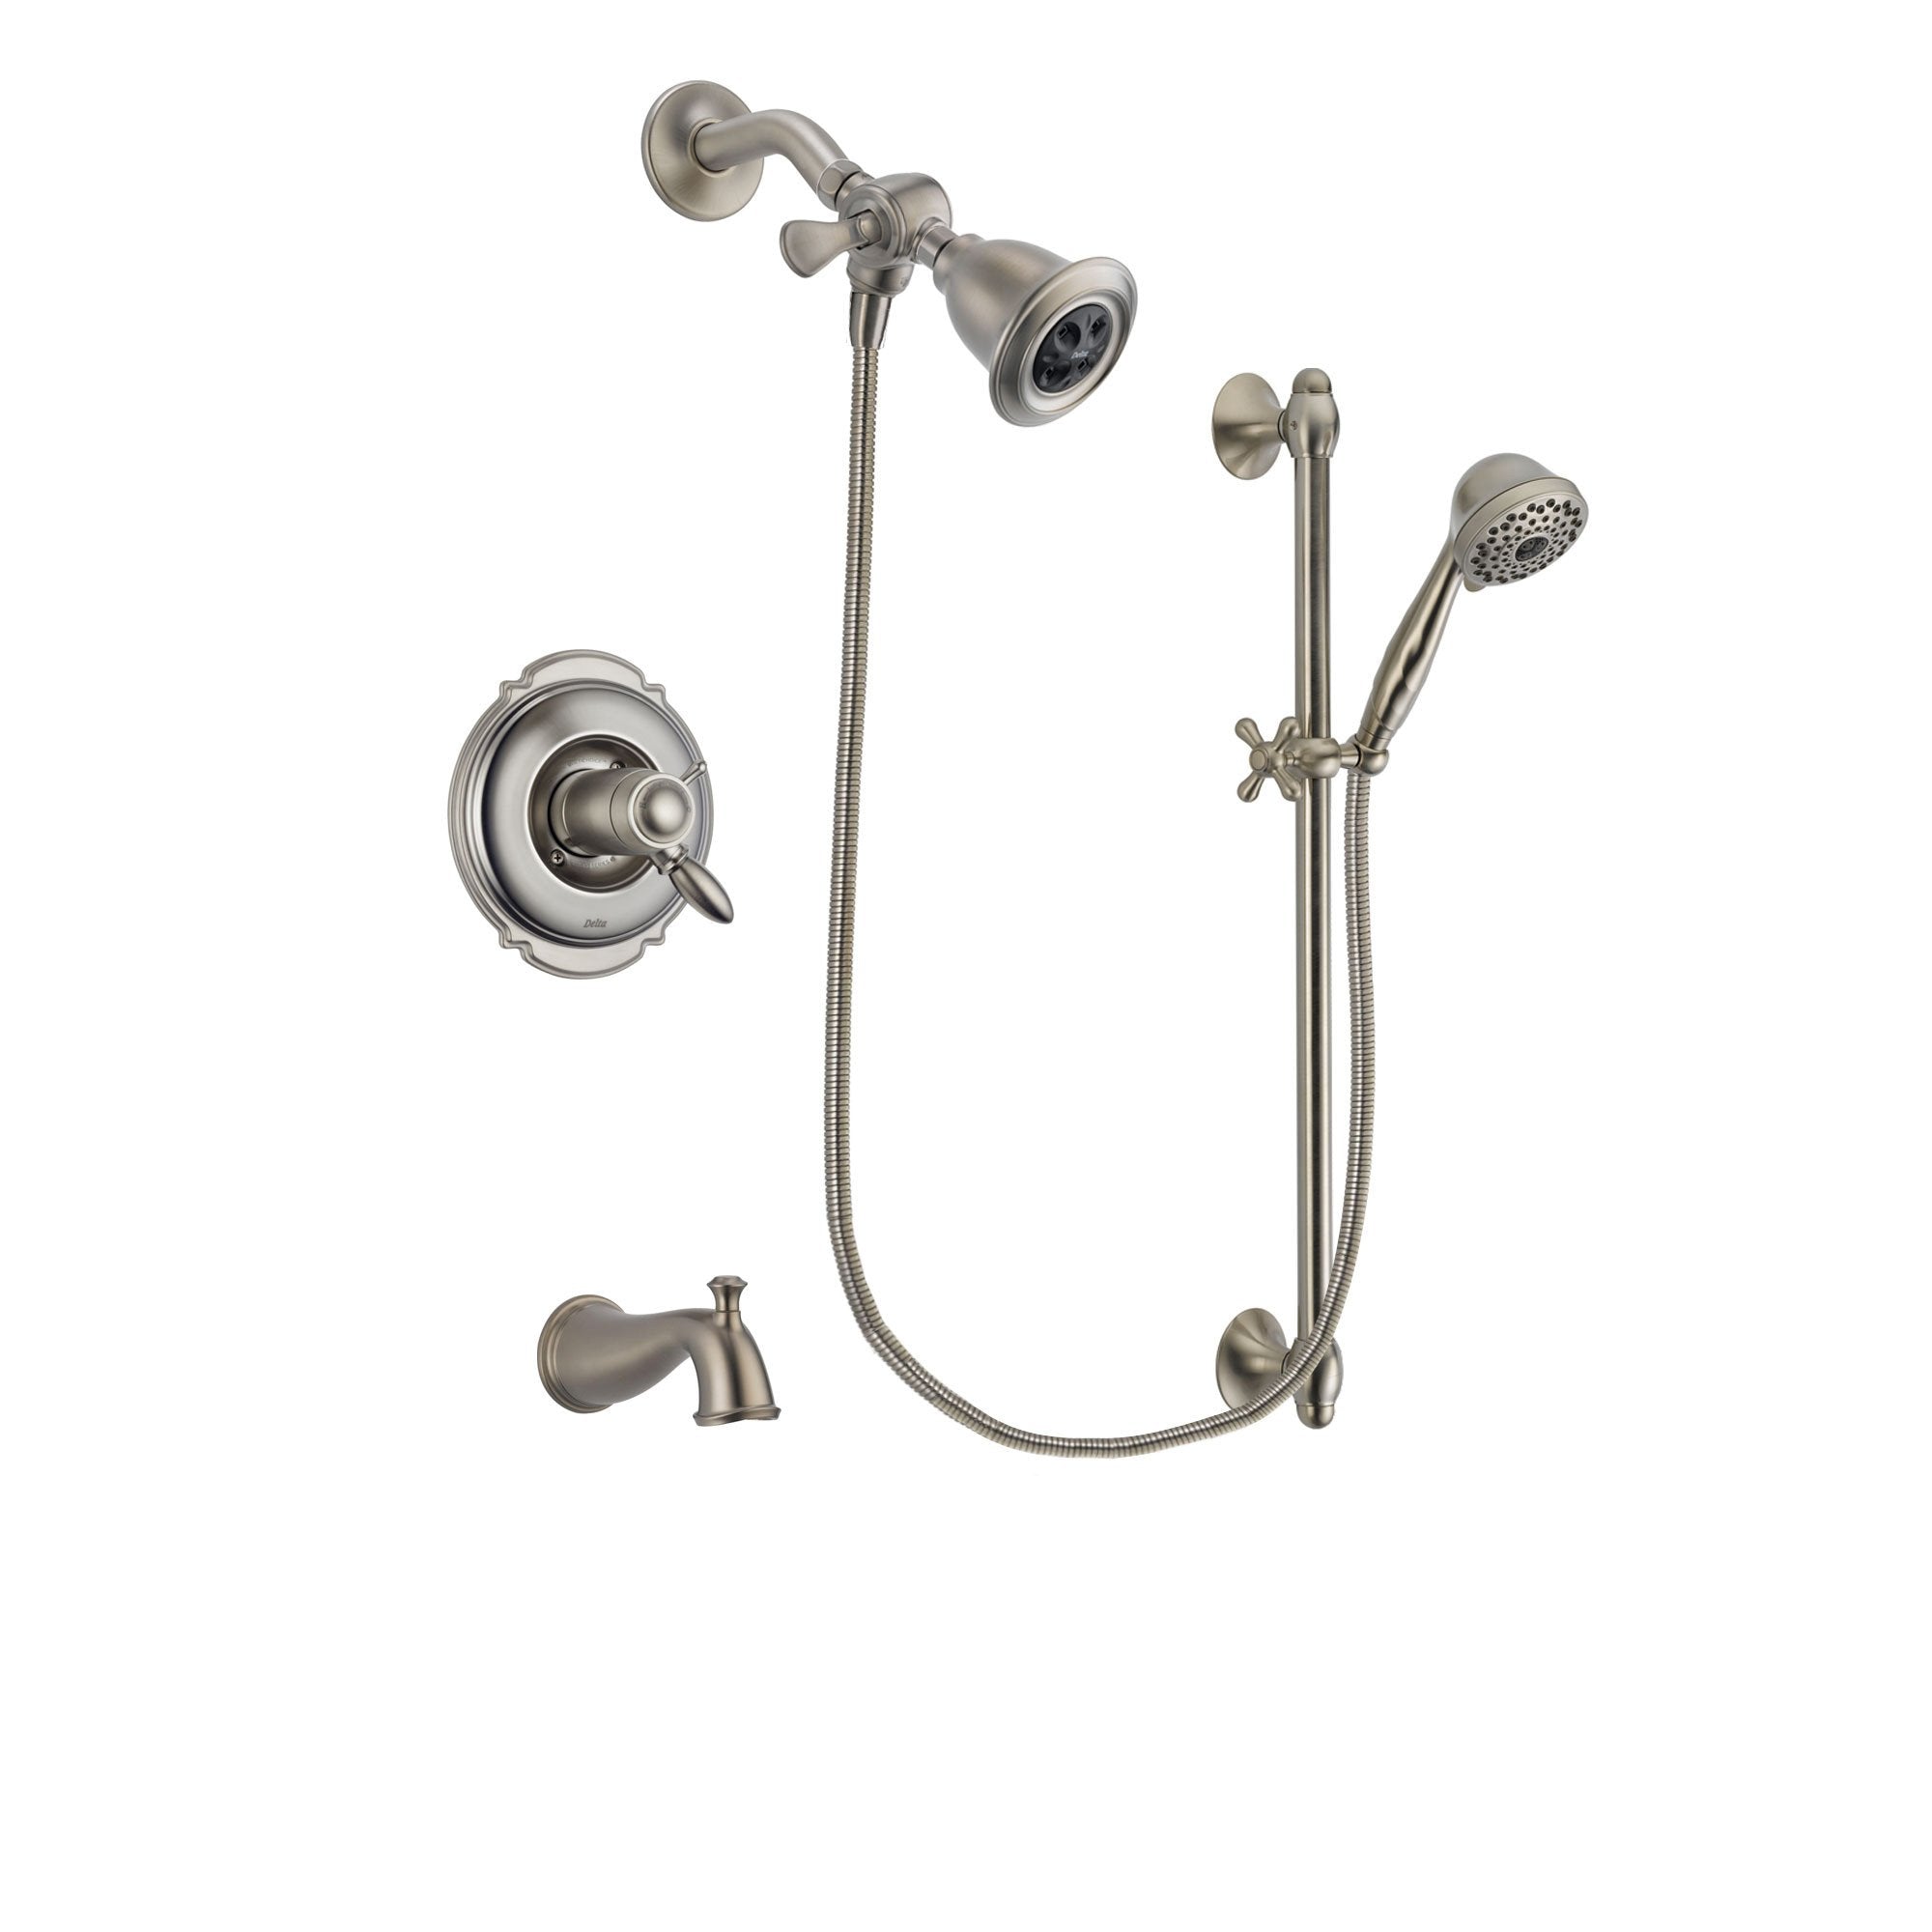 Delta Victorian Stainless Steel Finish Thermostatic Tub and Shower Faucet System Package with Water Efficient Showerhead and 7-Spray Handheld Shower with Slide Bar Includes Rough-in Valve and Tub Spout DSP1685V